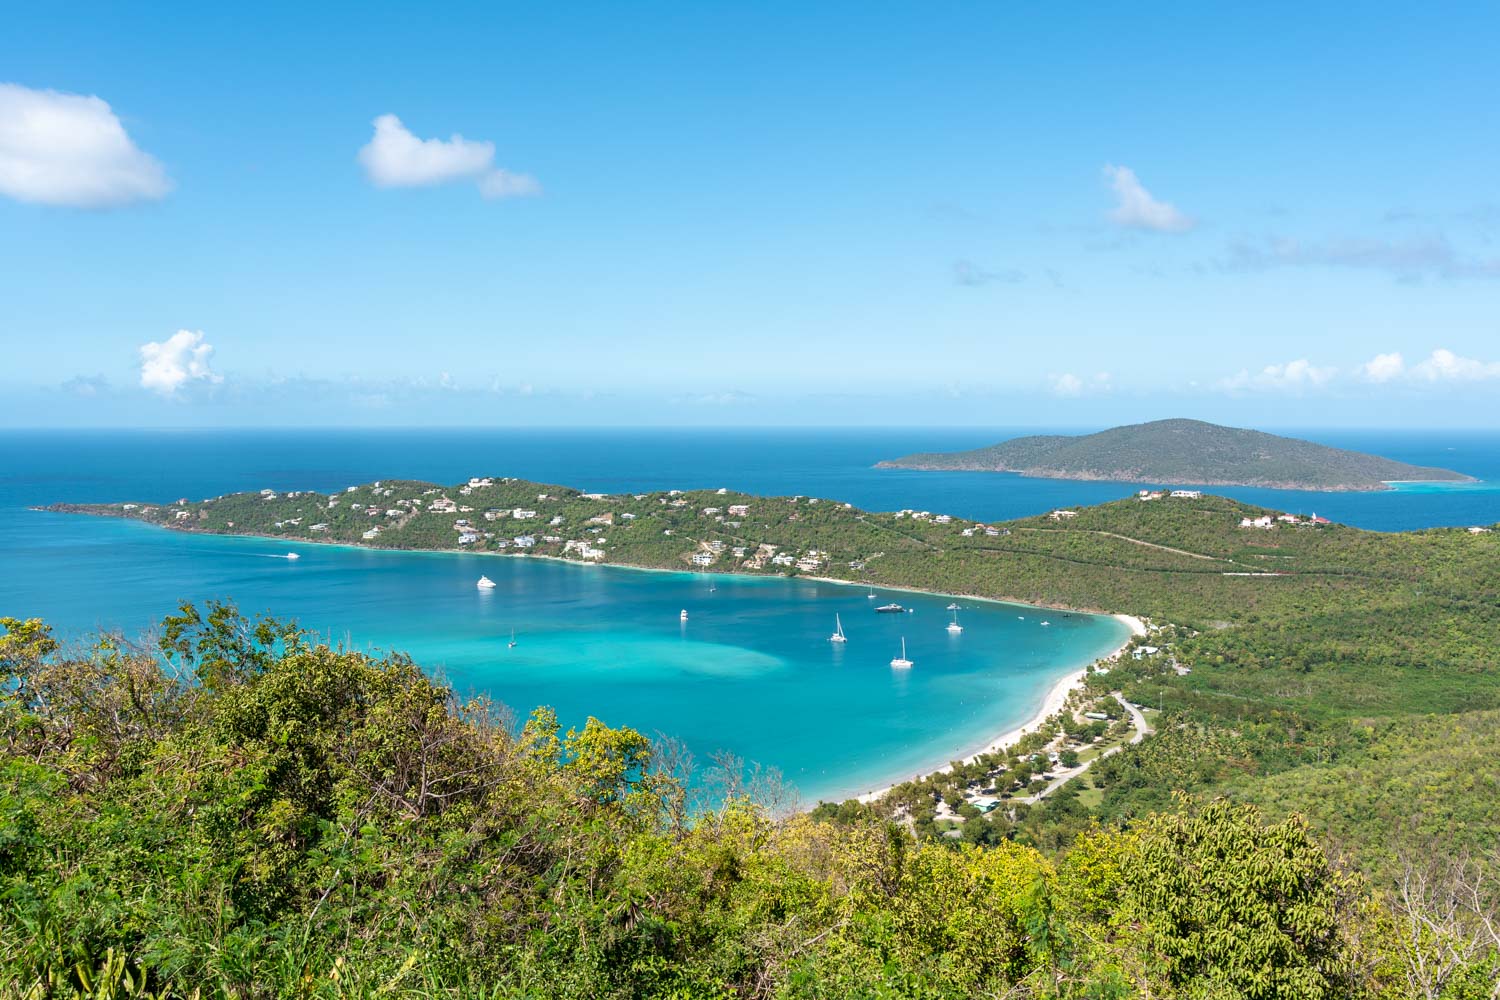 Visiting Magen's Bay is one of the top things to do in St. Thomas.